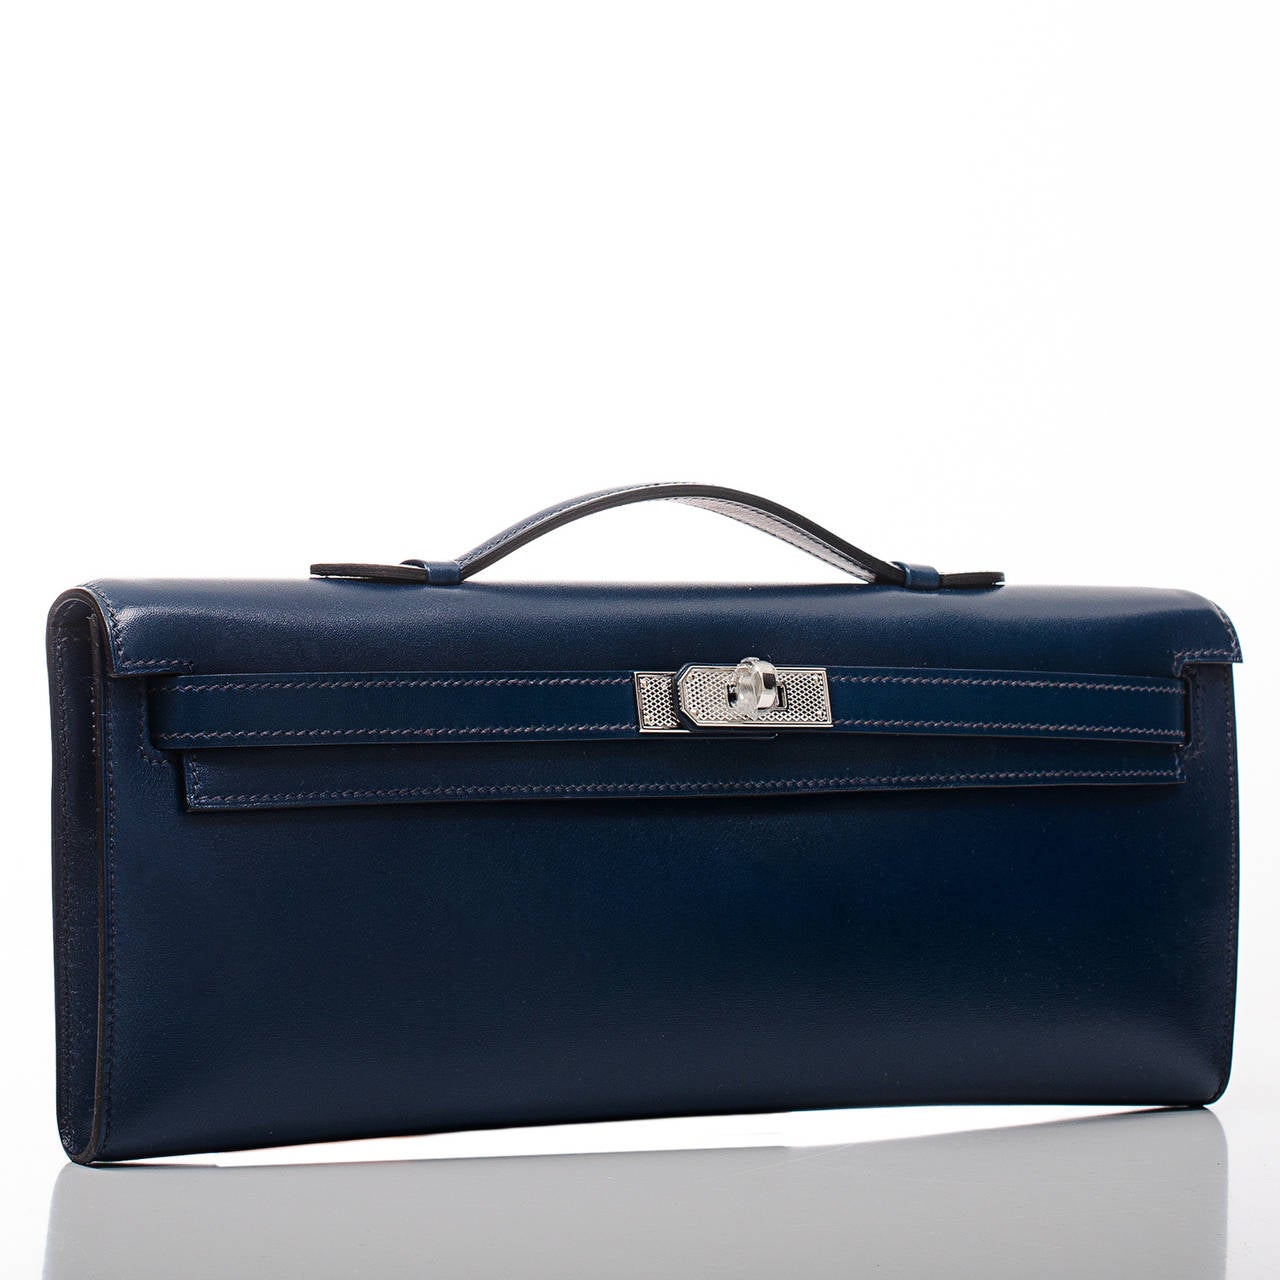 Hermes Blue de Prusse Kelly Cut clutch in box (smooth calfskin) leather with palladium guilloche hardware.

Hermes introduced the Kelly Cut in the fall/winter collection in 2006. The long, sleek lines with the small handle accented by the iconic